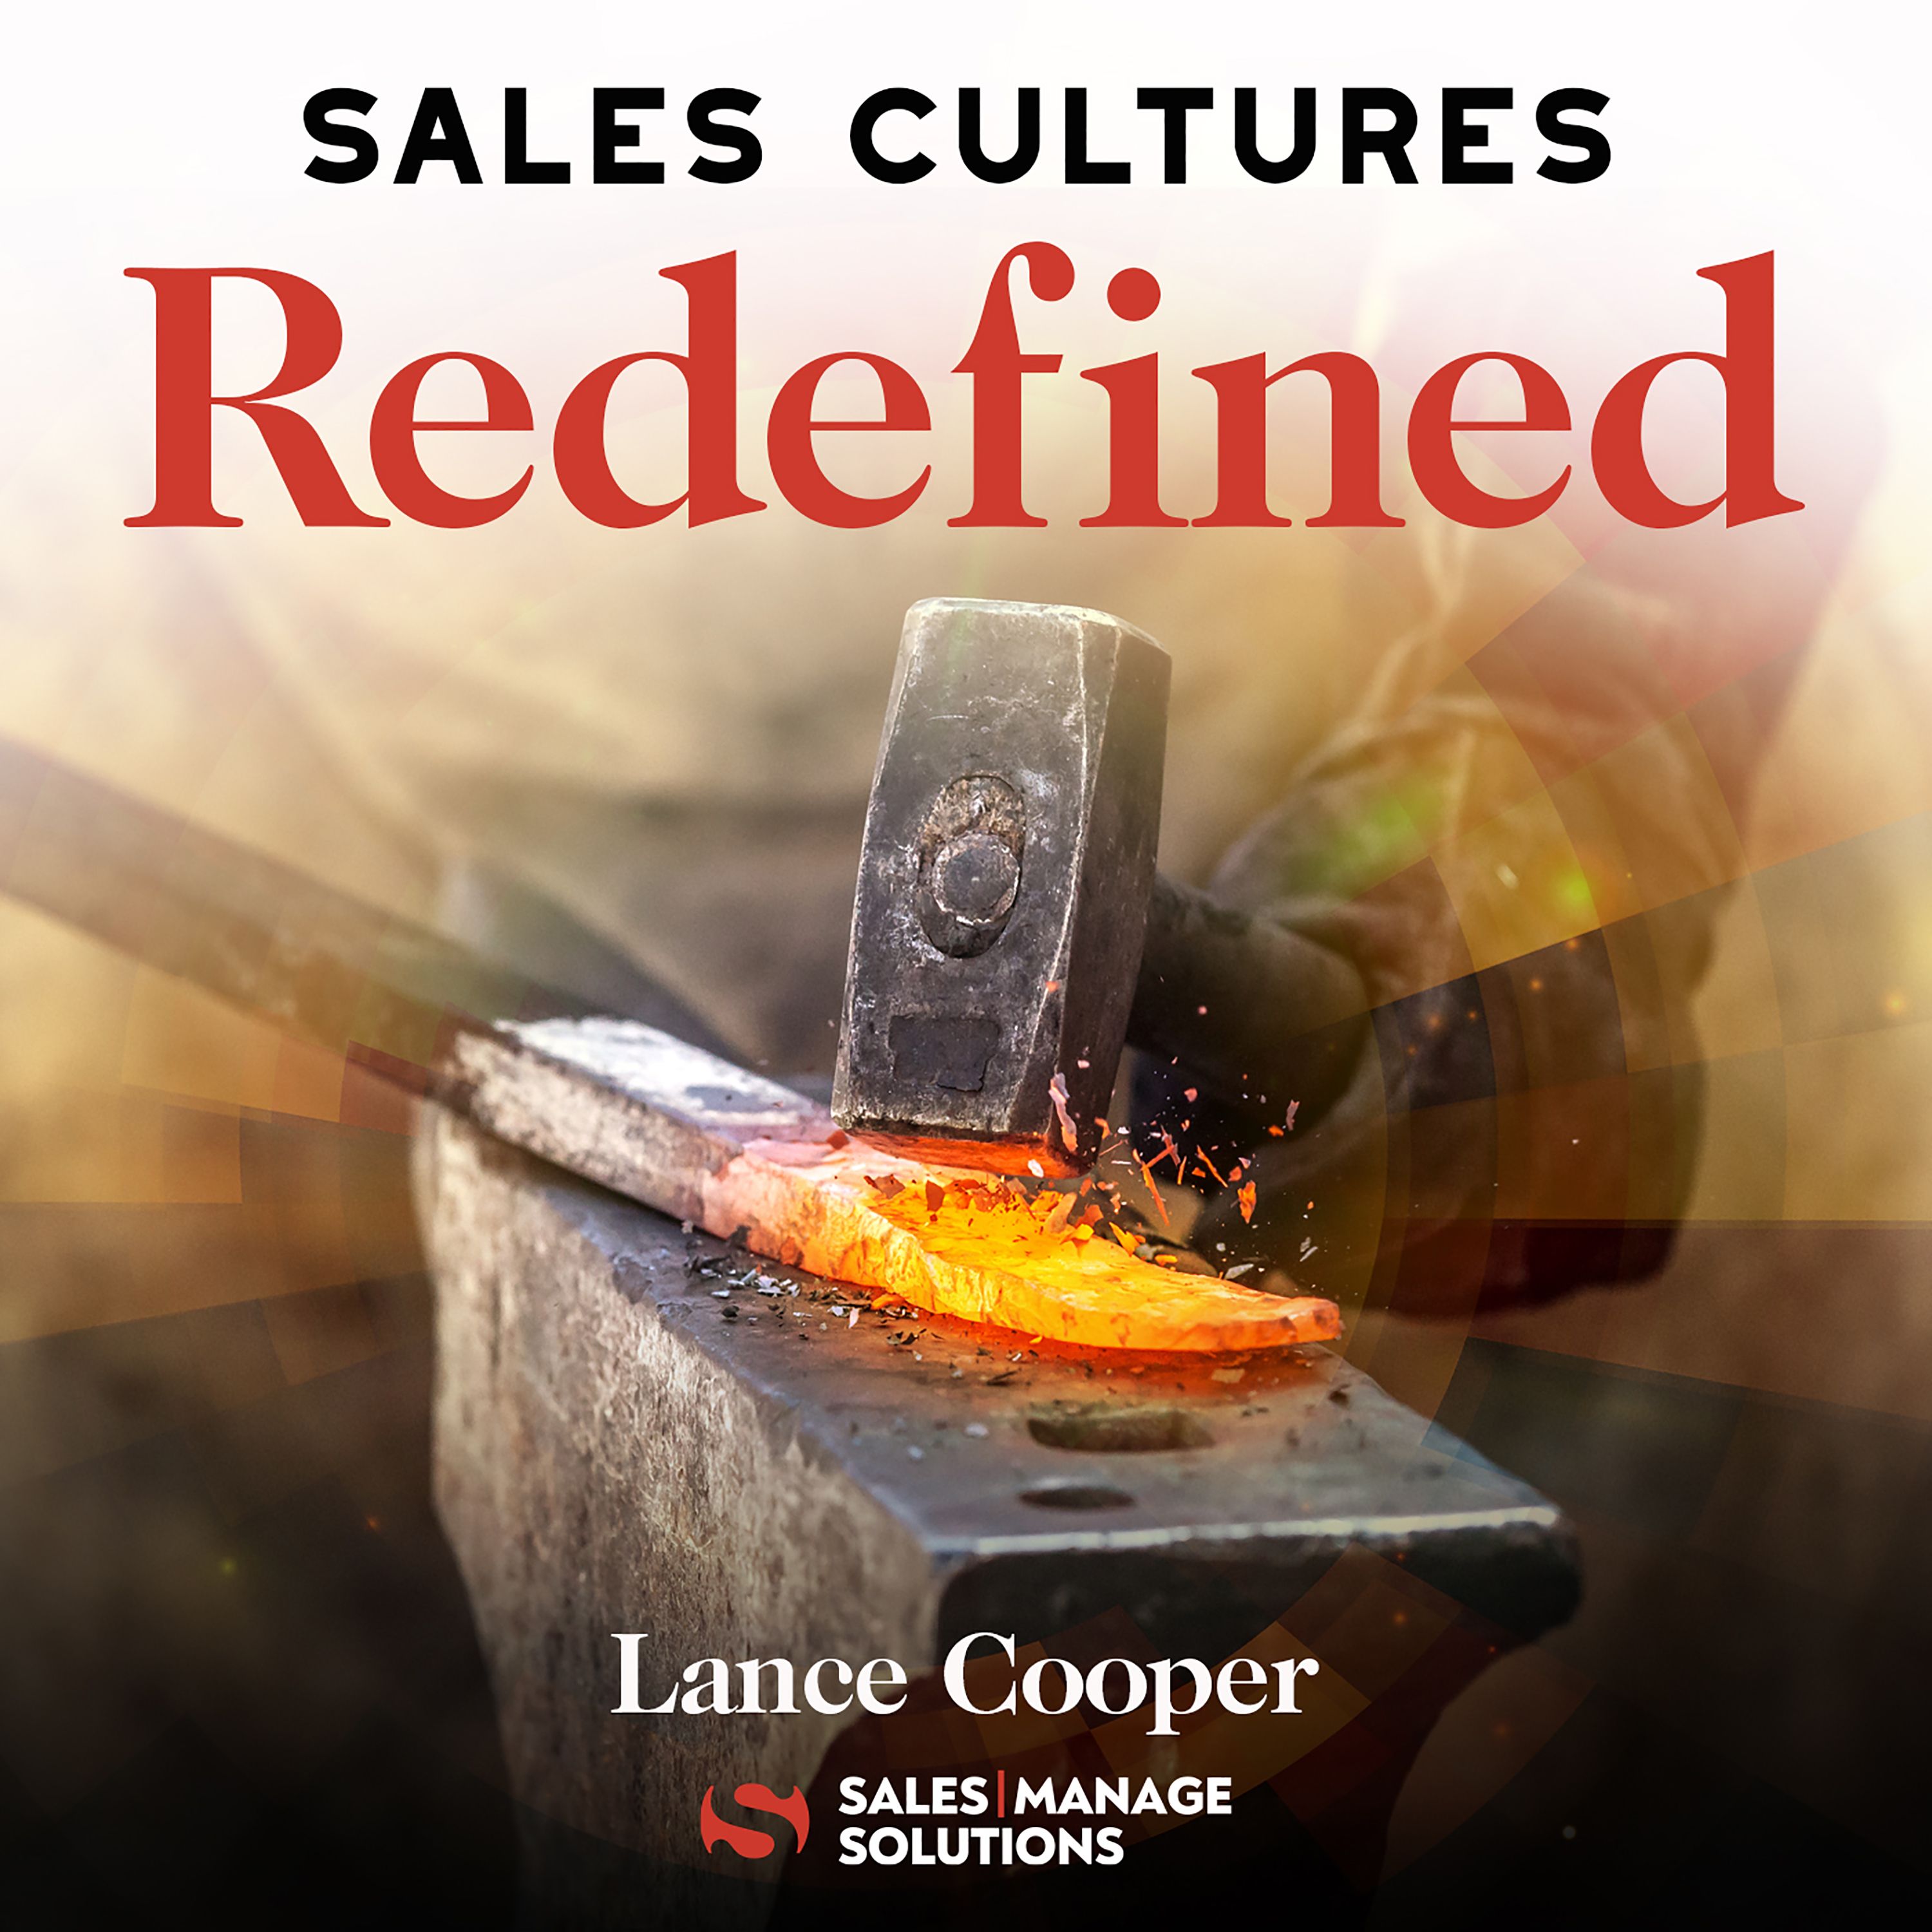 Sales Cultures Redefined